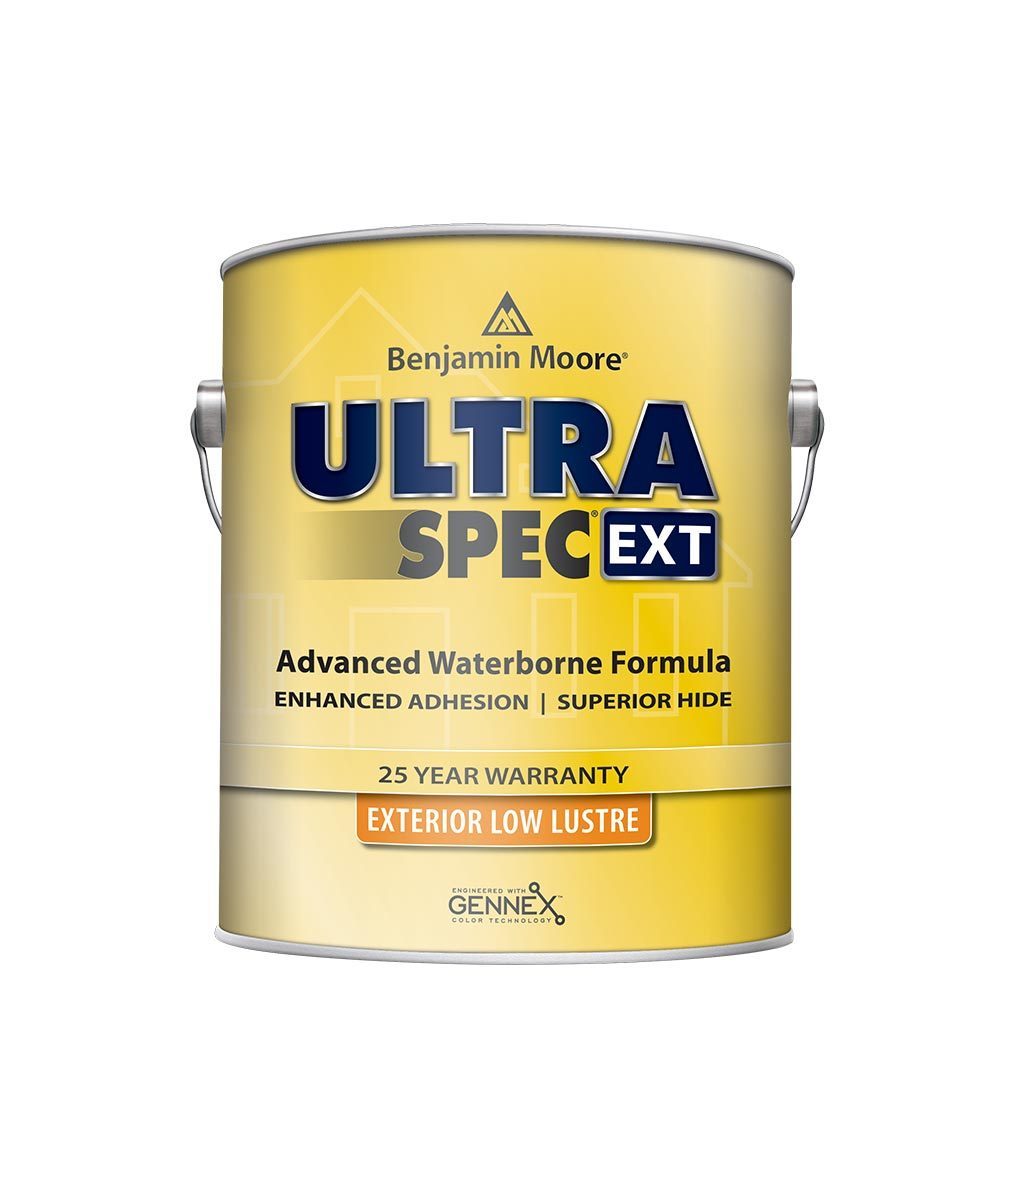 Benjamin Moore Ultra Spec EXT exterior paint in low lustre finish available at JC Licht.